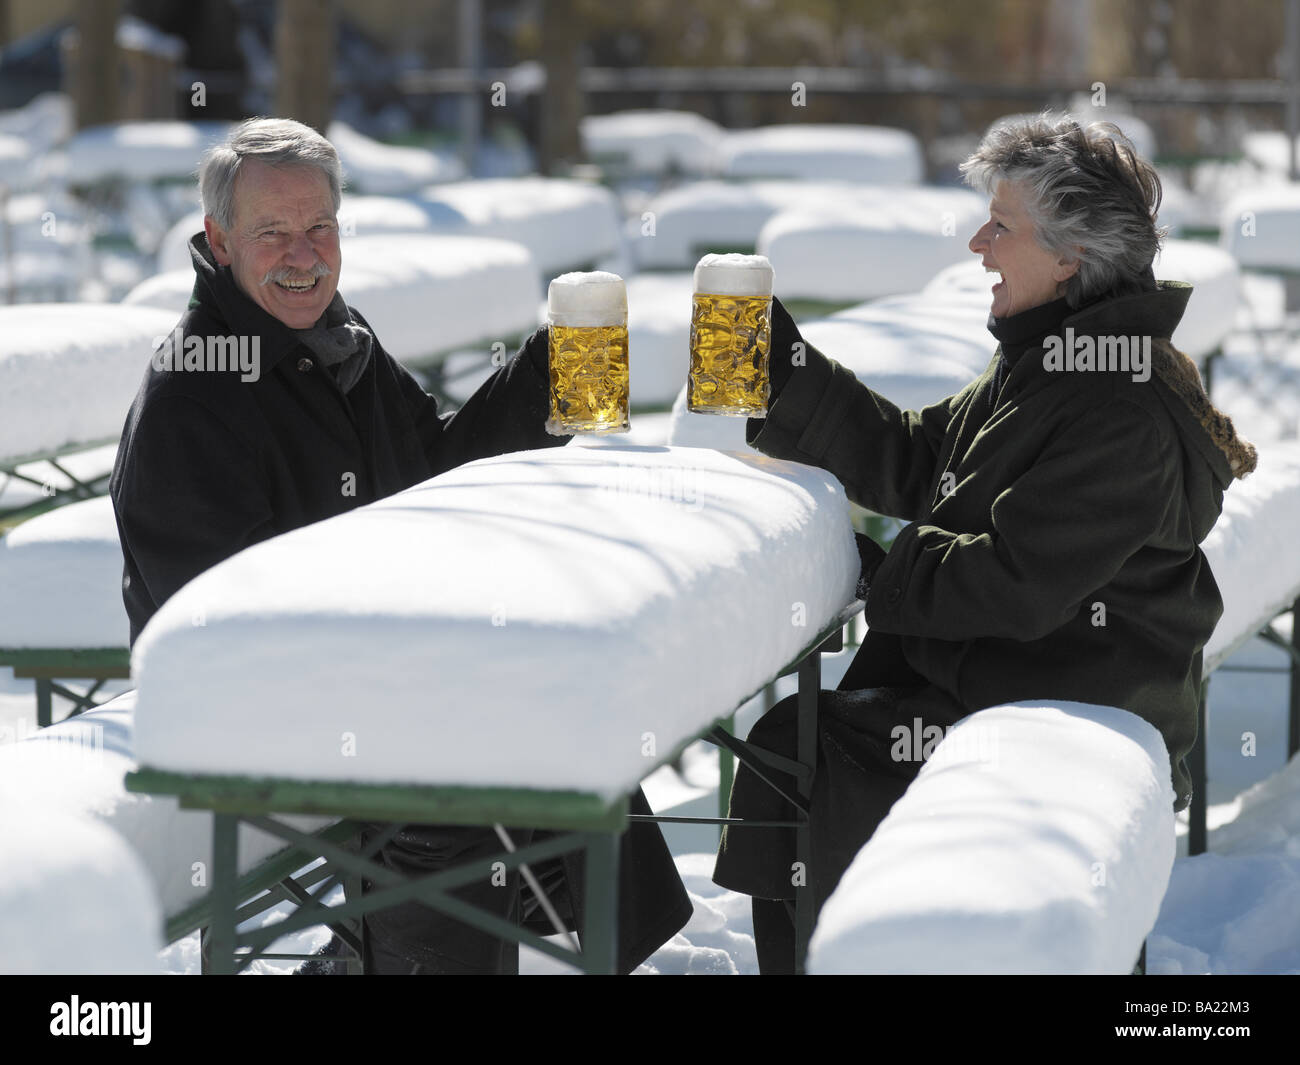 beer-garden-tables-benches-snow-covered-senior-pair-beer-glasses-bumps-BA22M3.jpg